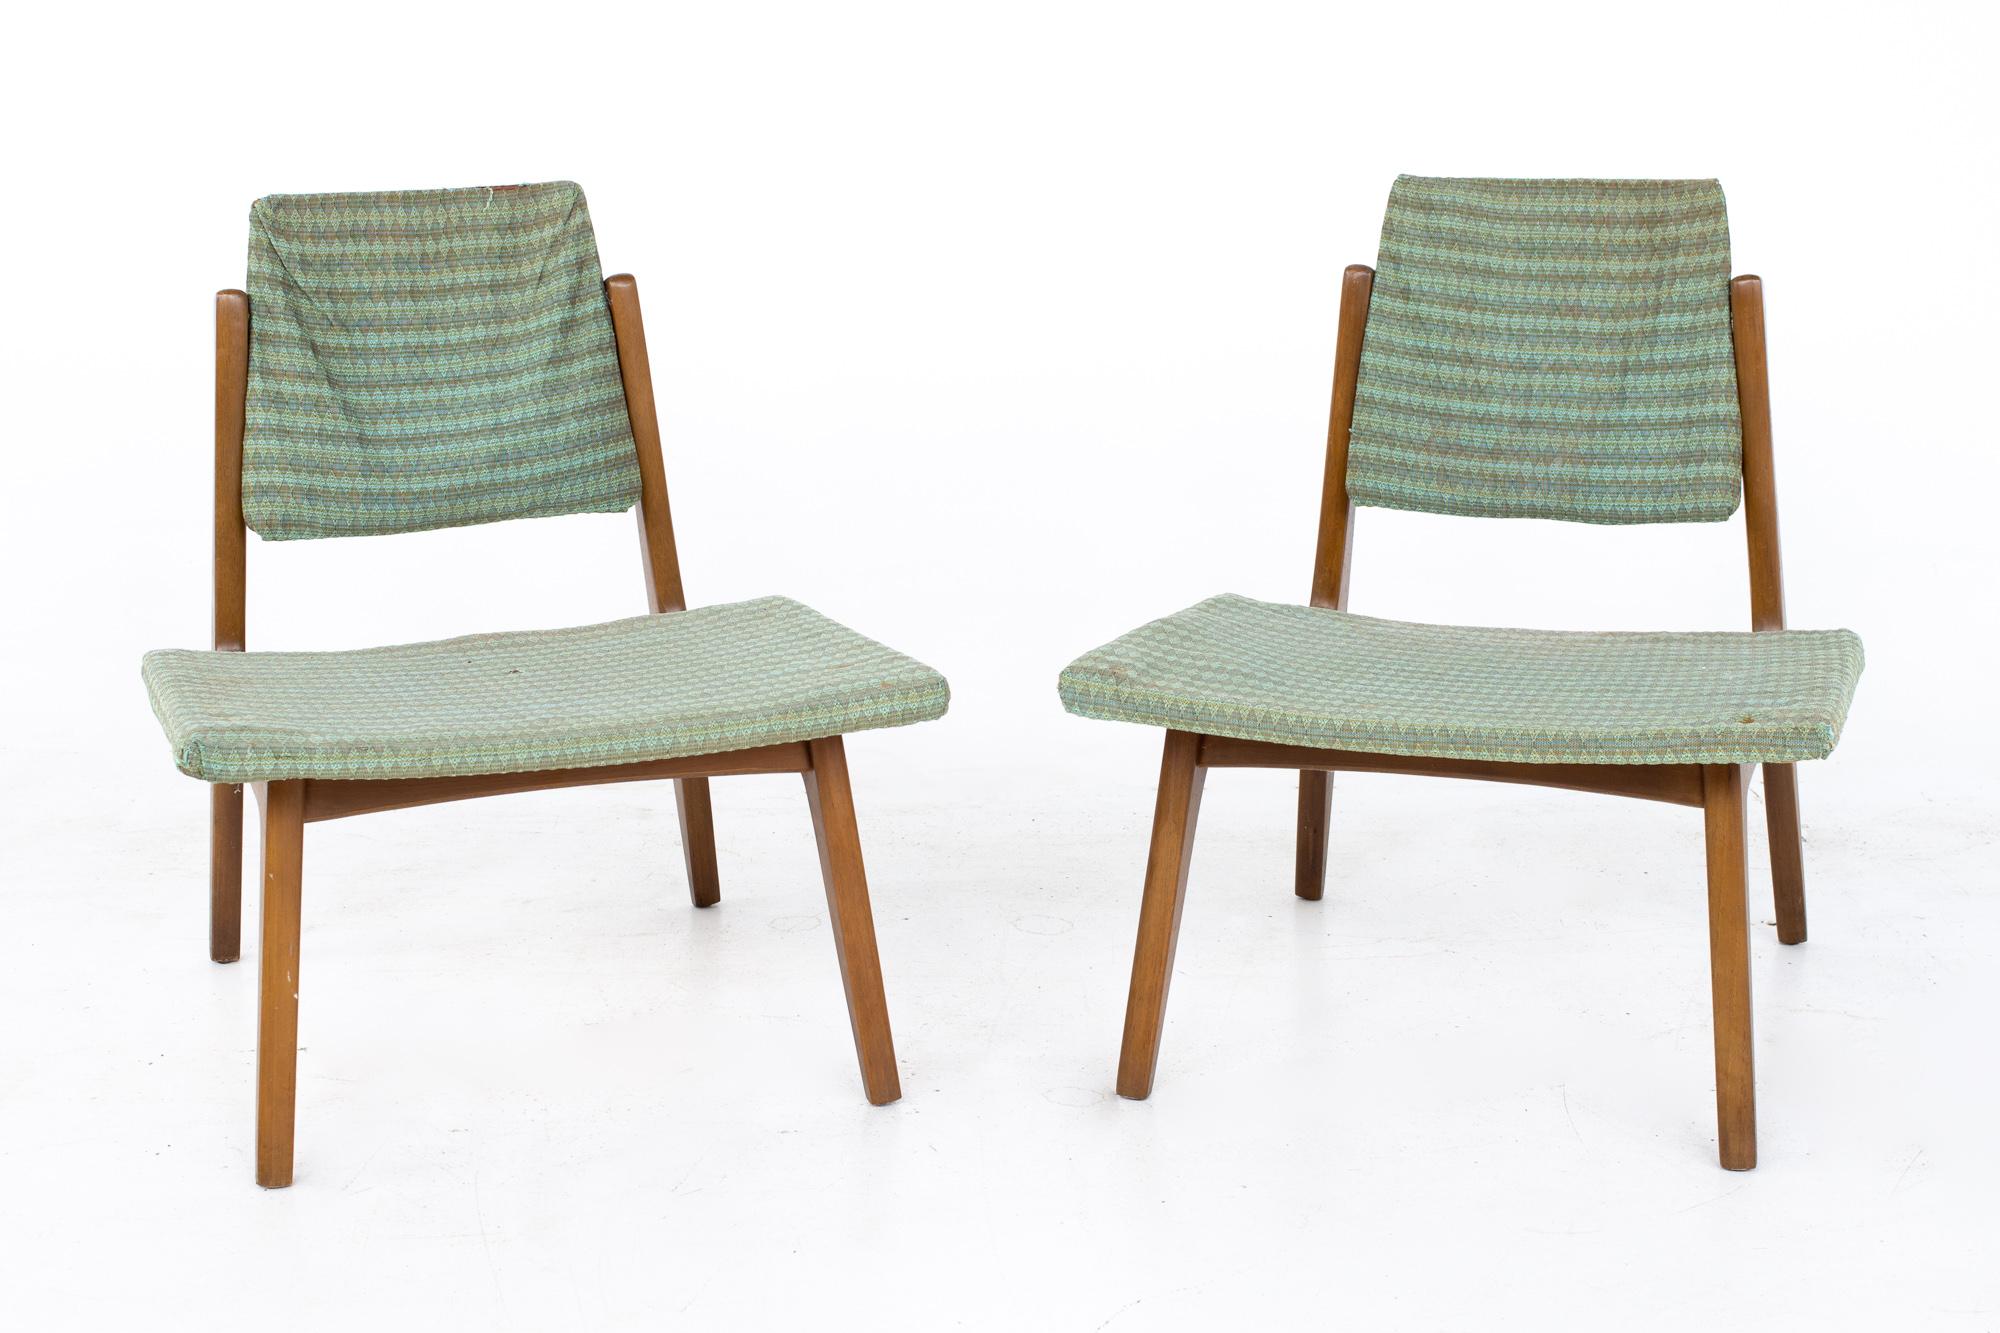 Wytheville Chair Company mid century low occasional slipper lounge chairs - a pair
Each chair measures: 20.5 wide x 22 deep x 25.5 high, with a seat height of 12.5 inches

All pieces of furniture can be had in what we call restored vintage